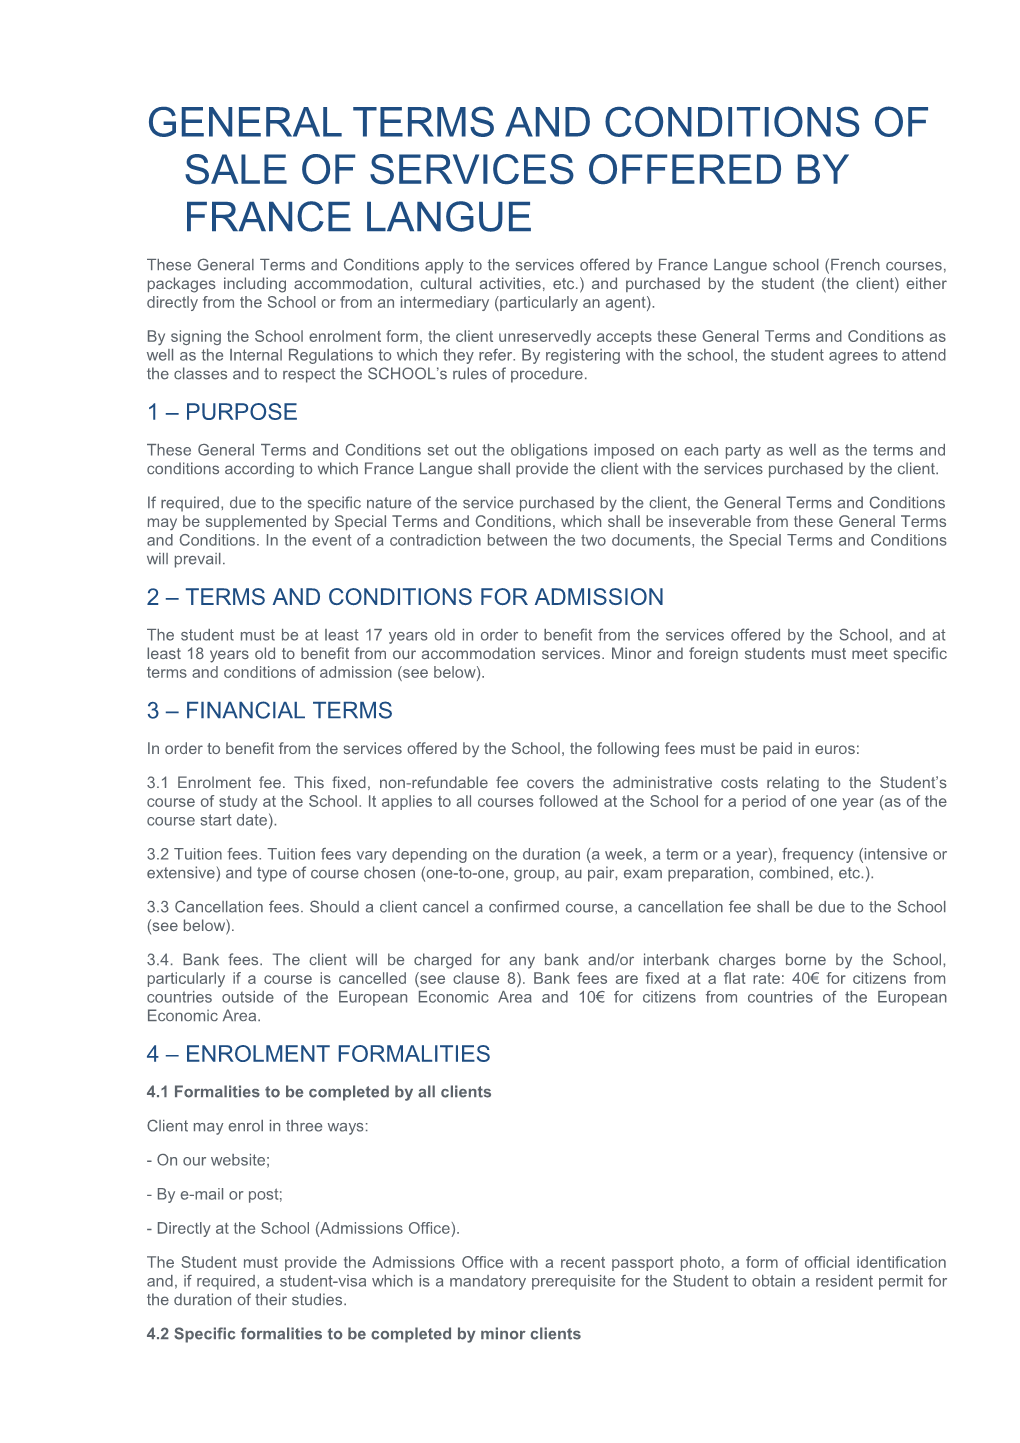 General Terms and Conditions of Sale of Services Offered by France Langue